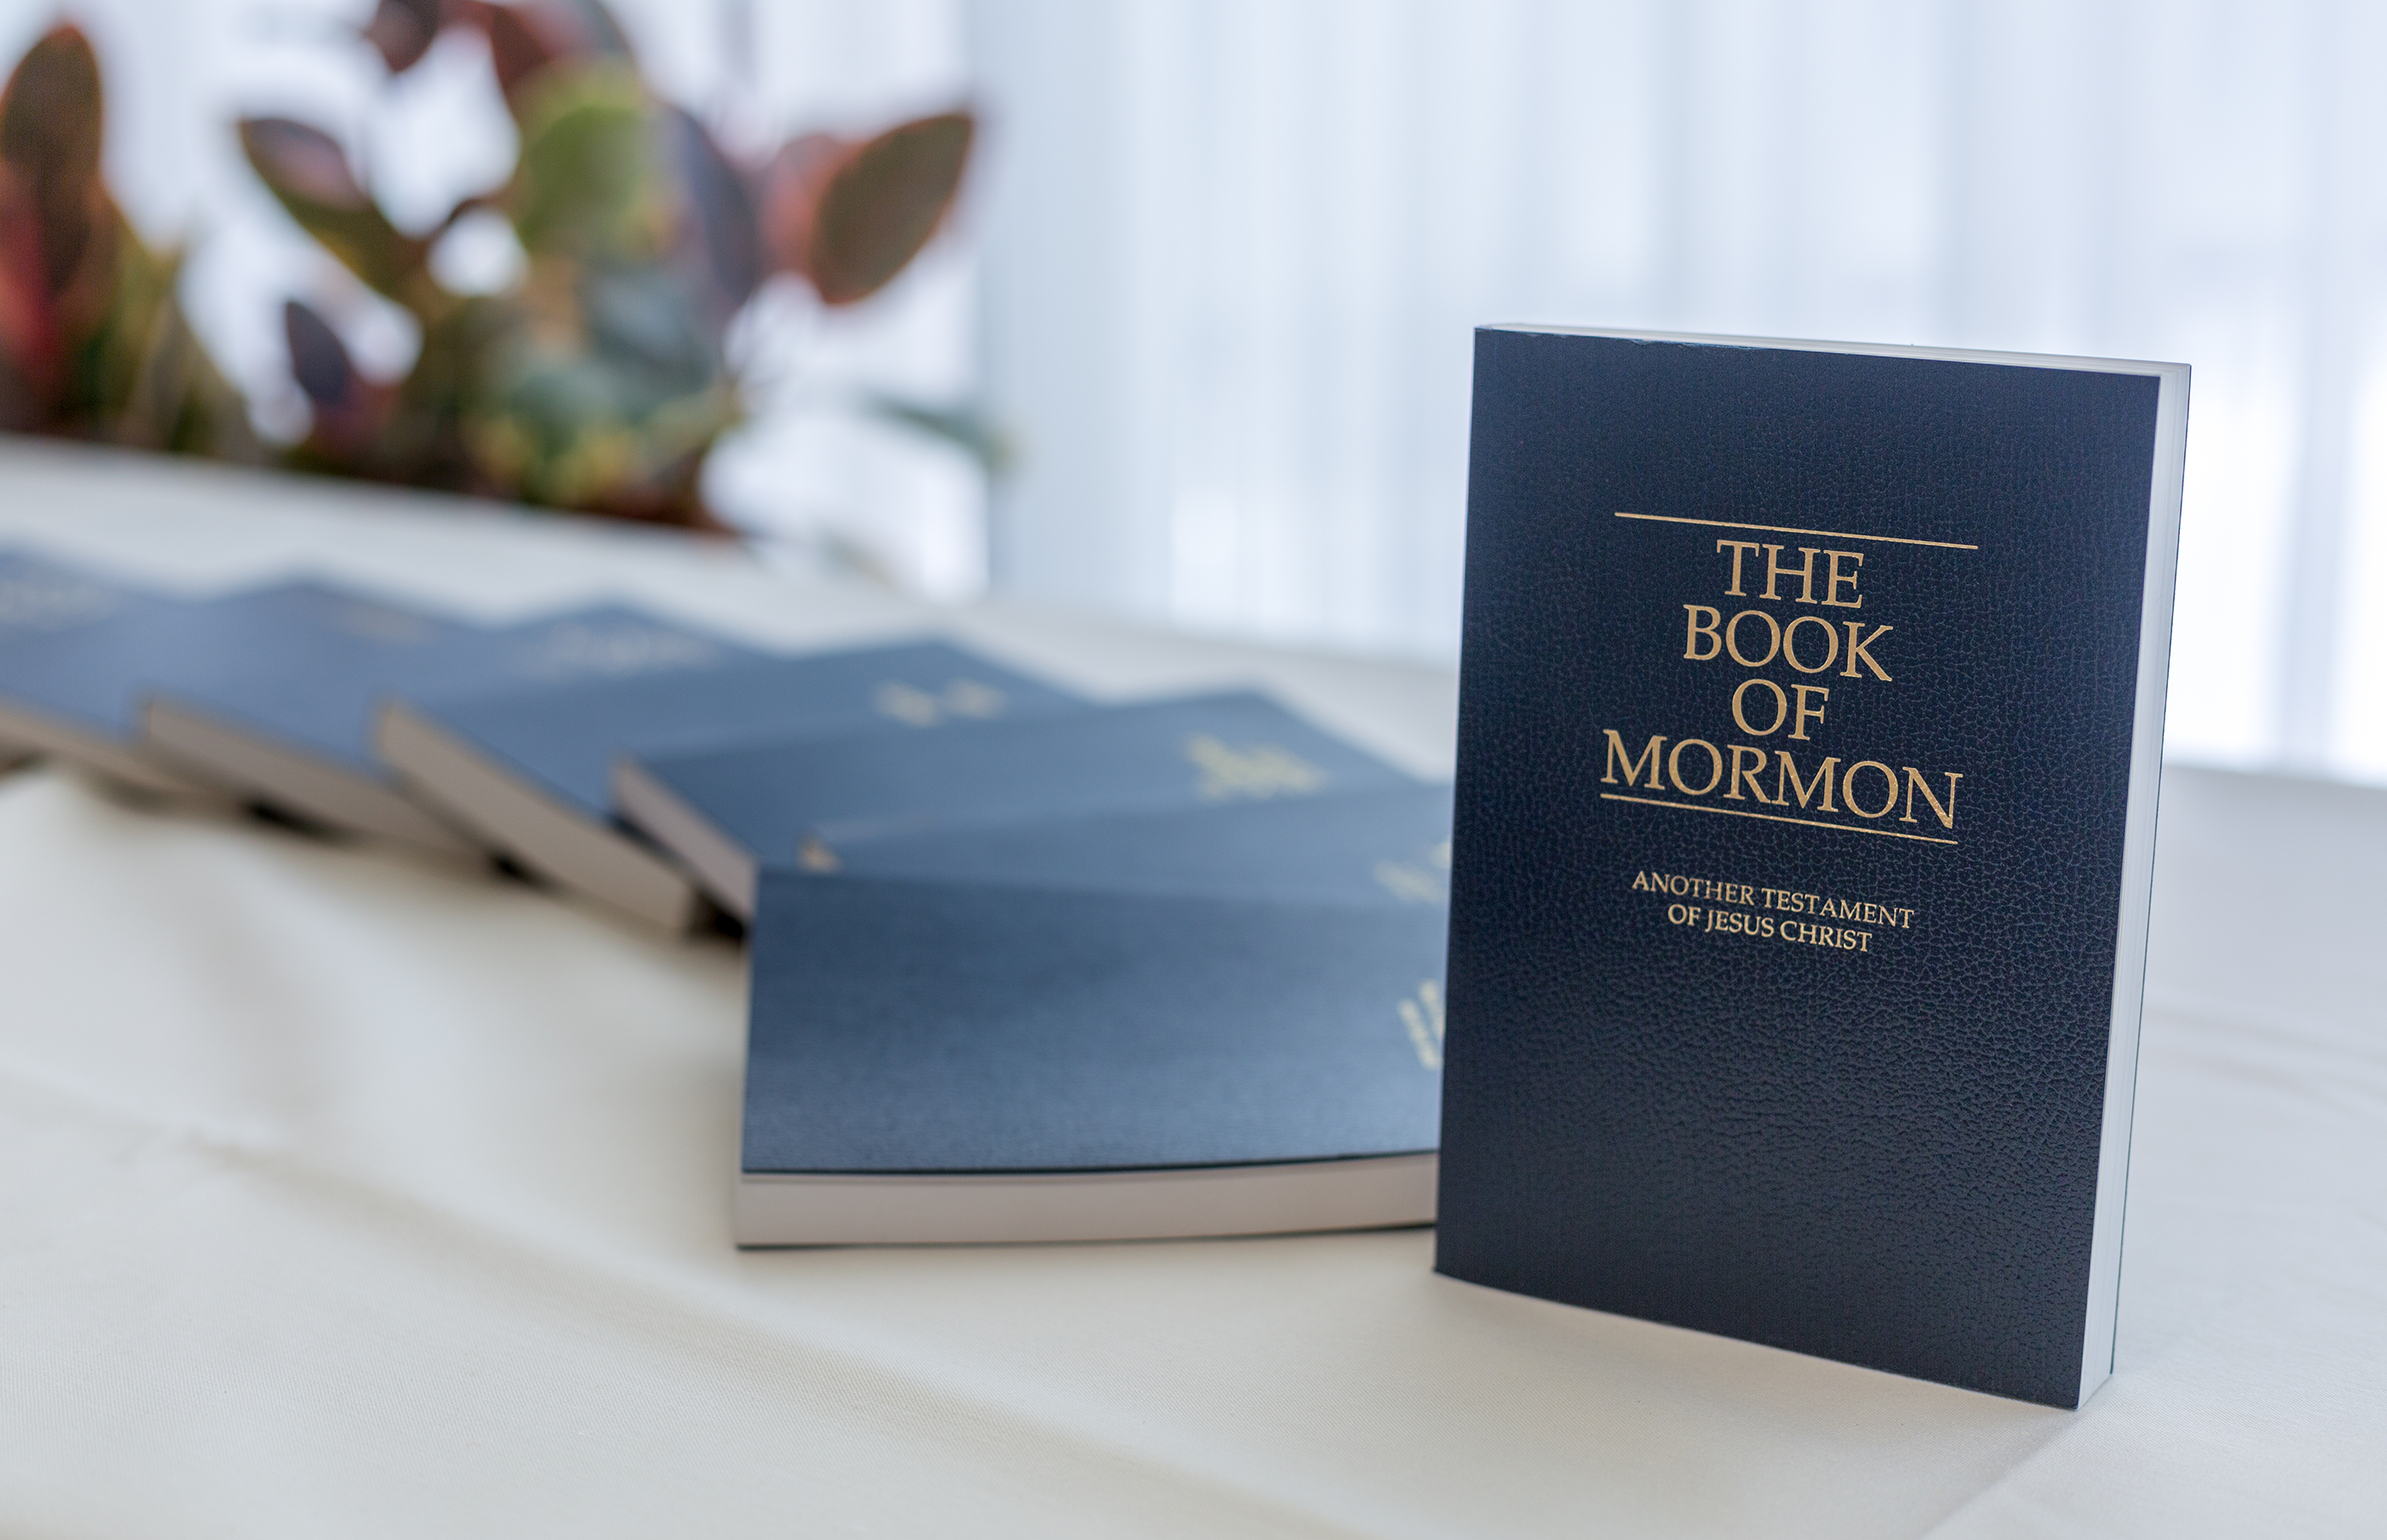 Image of Book of Mormon upright with several more laying down on a table next to it.